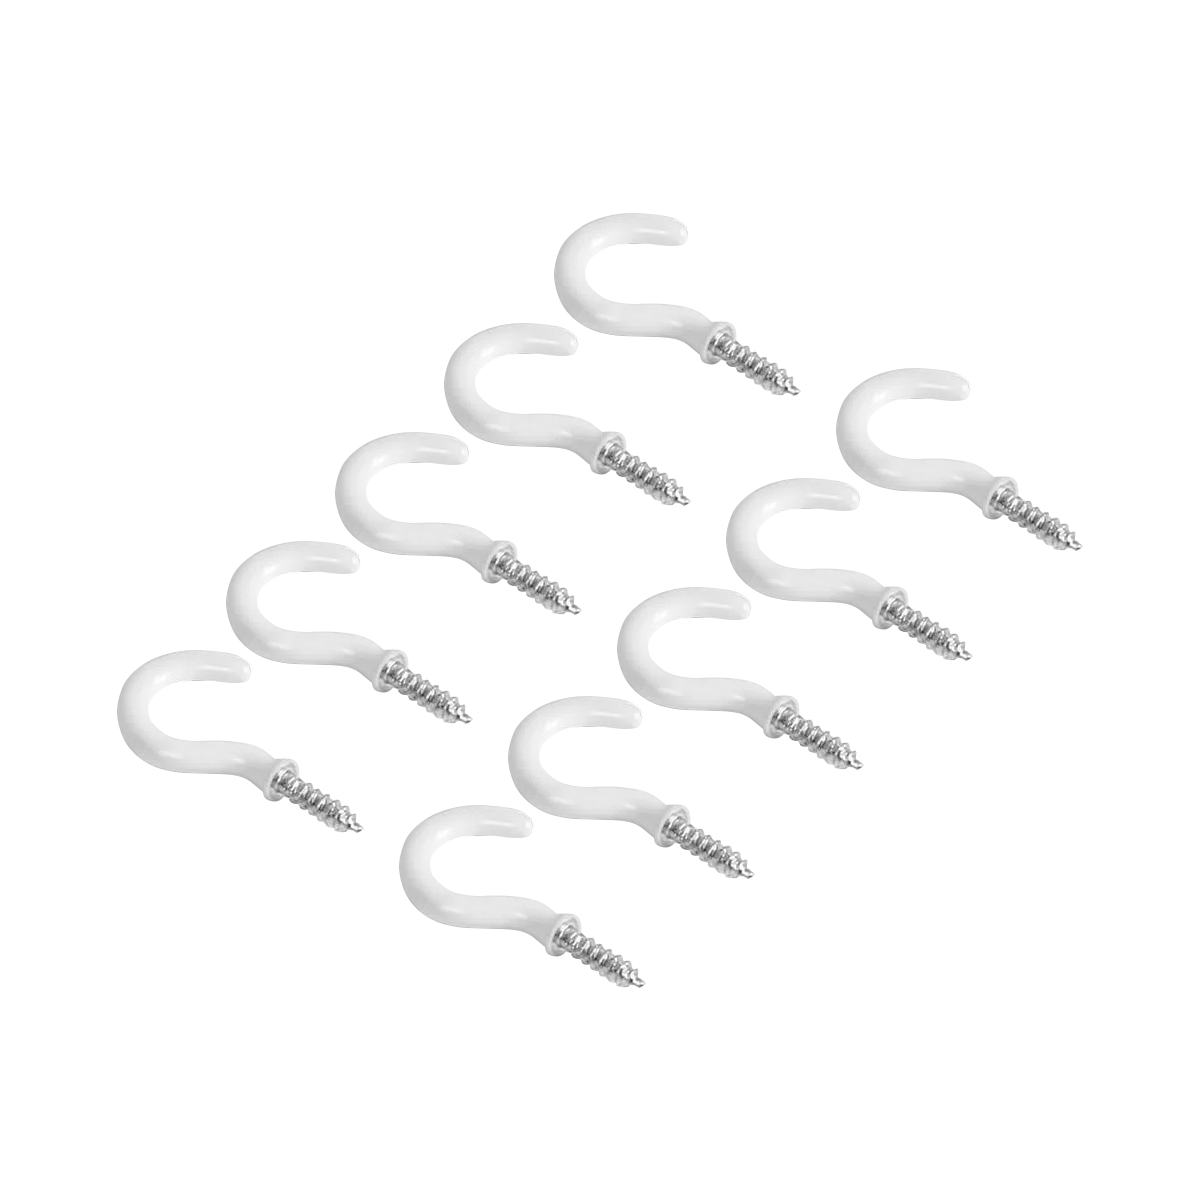 Outdoor White Cup Hooks for Walls and Ceilings, 10 Pack image 1